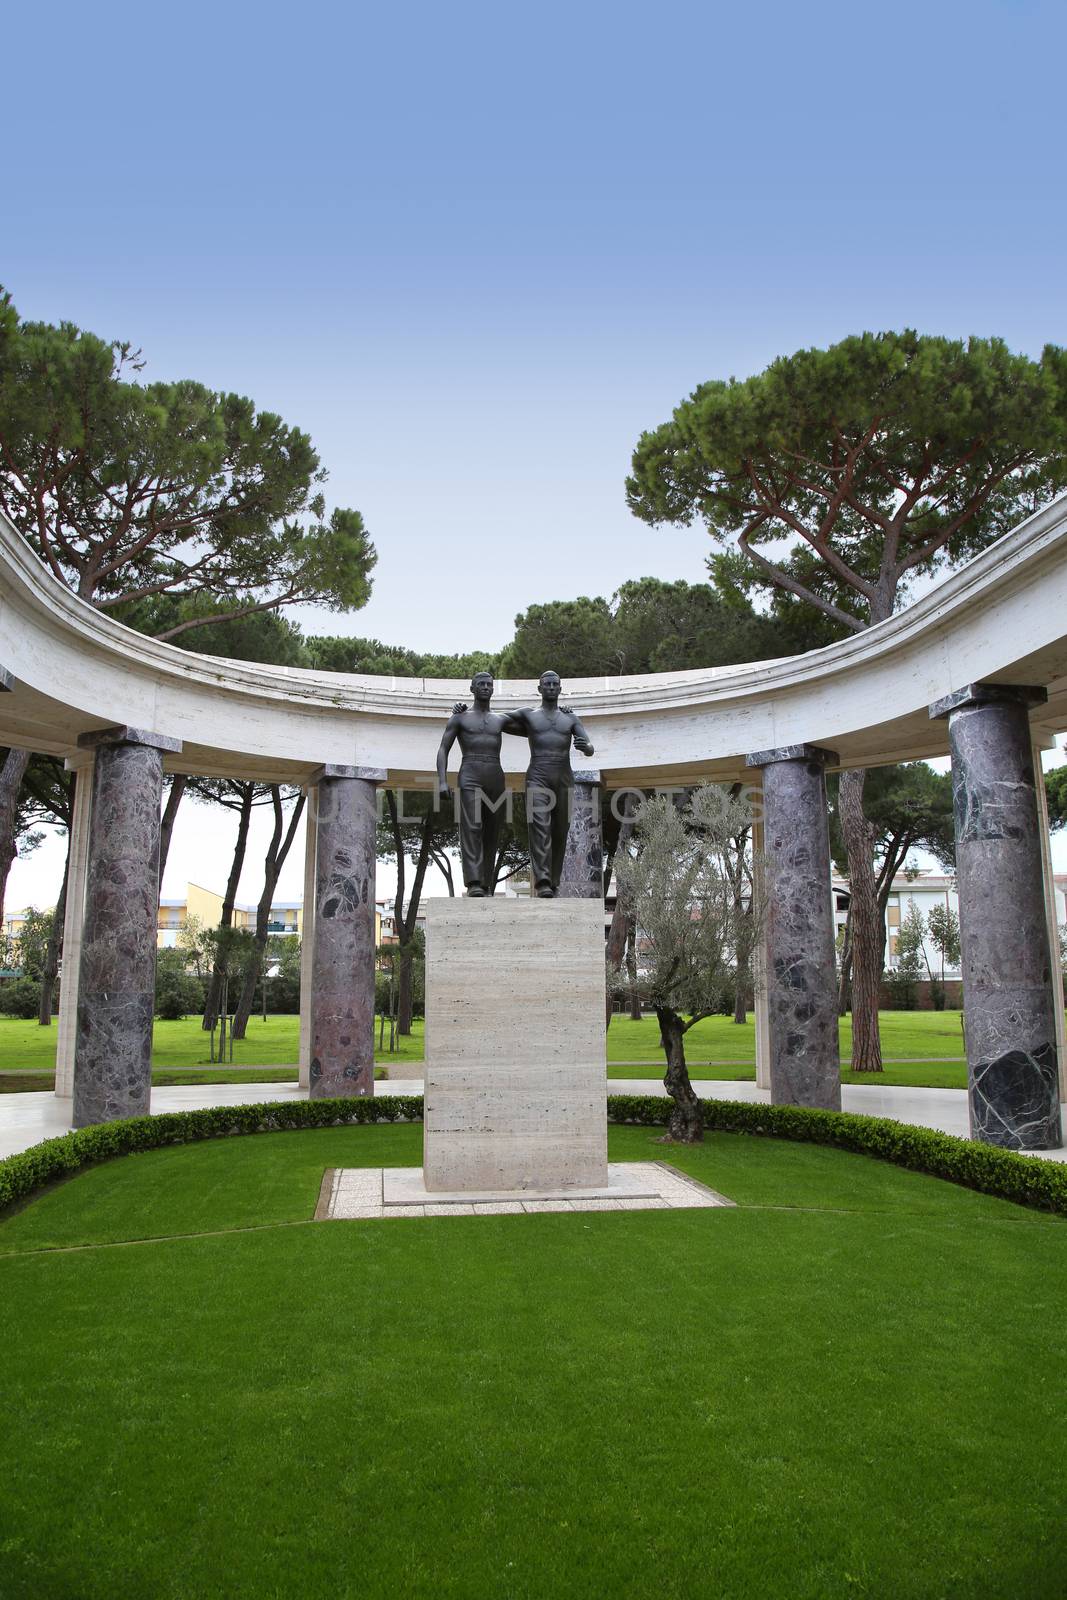 NETTUNO - April 06: Bronze statue of two brothers in arms of the American Military Cemetery of Nettuno in Italy, April 06, 2015 in Nettuno, Italy.